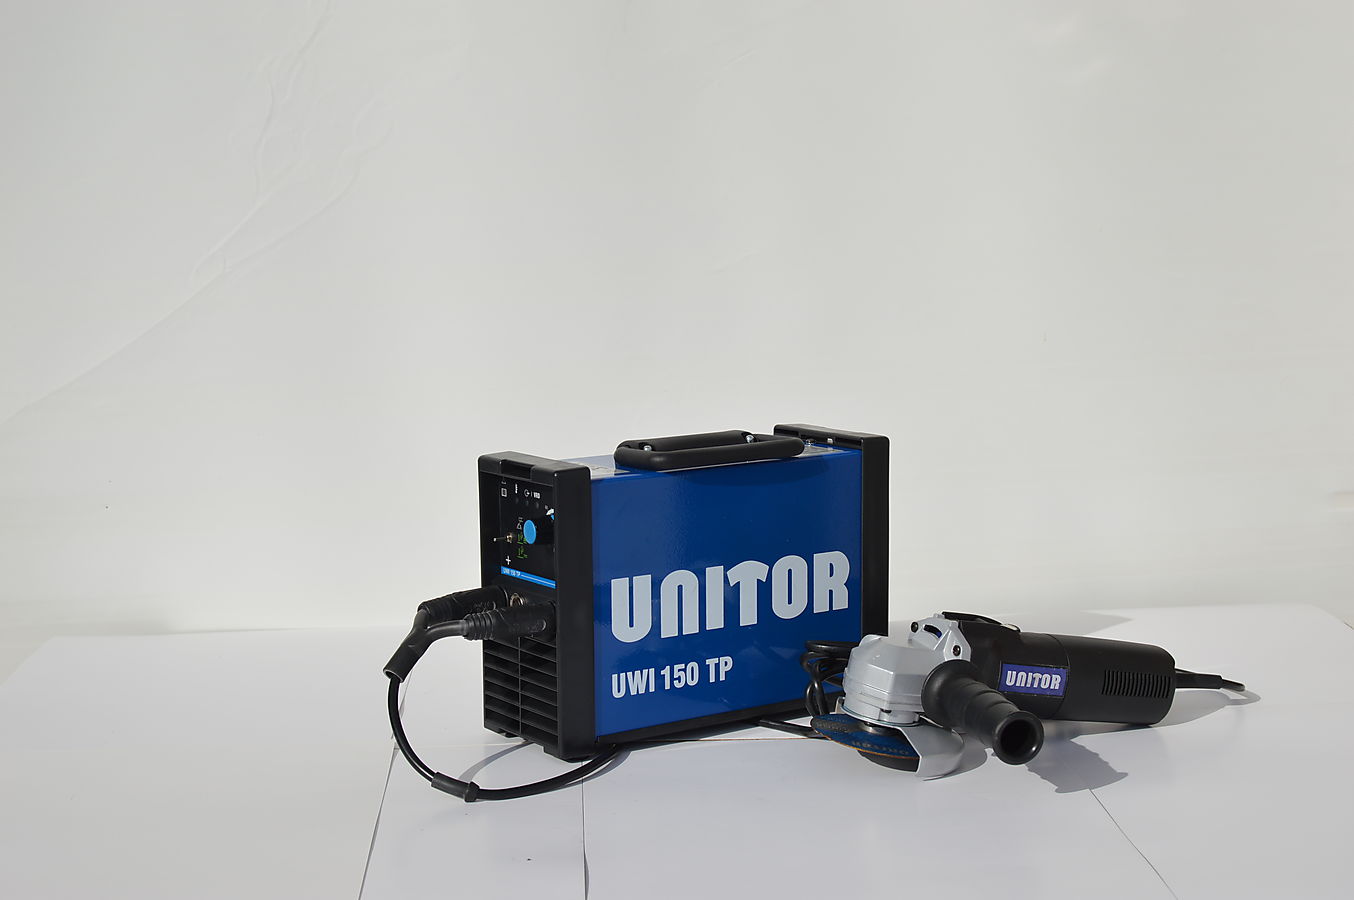 Safety Checks Every Welder Should Perform on a Daily Basis safe use of welding machine